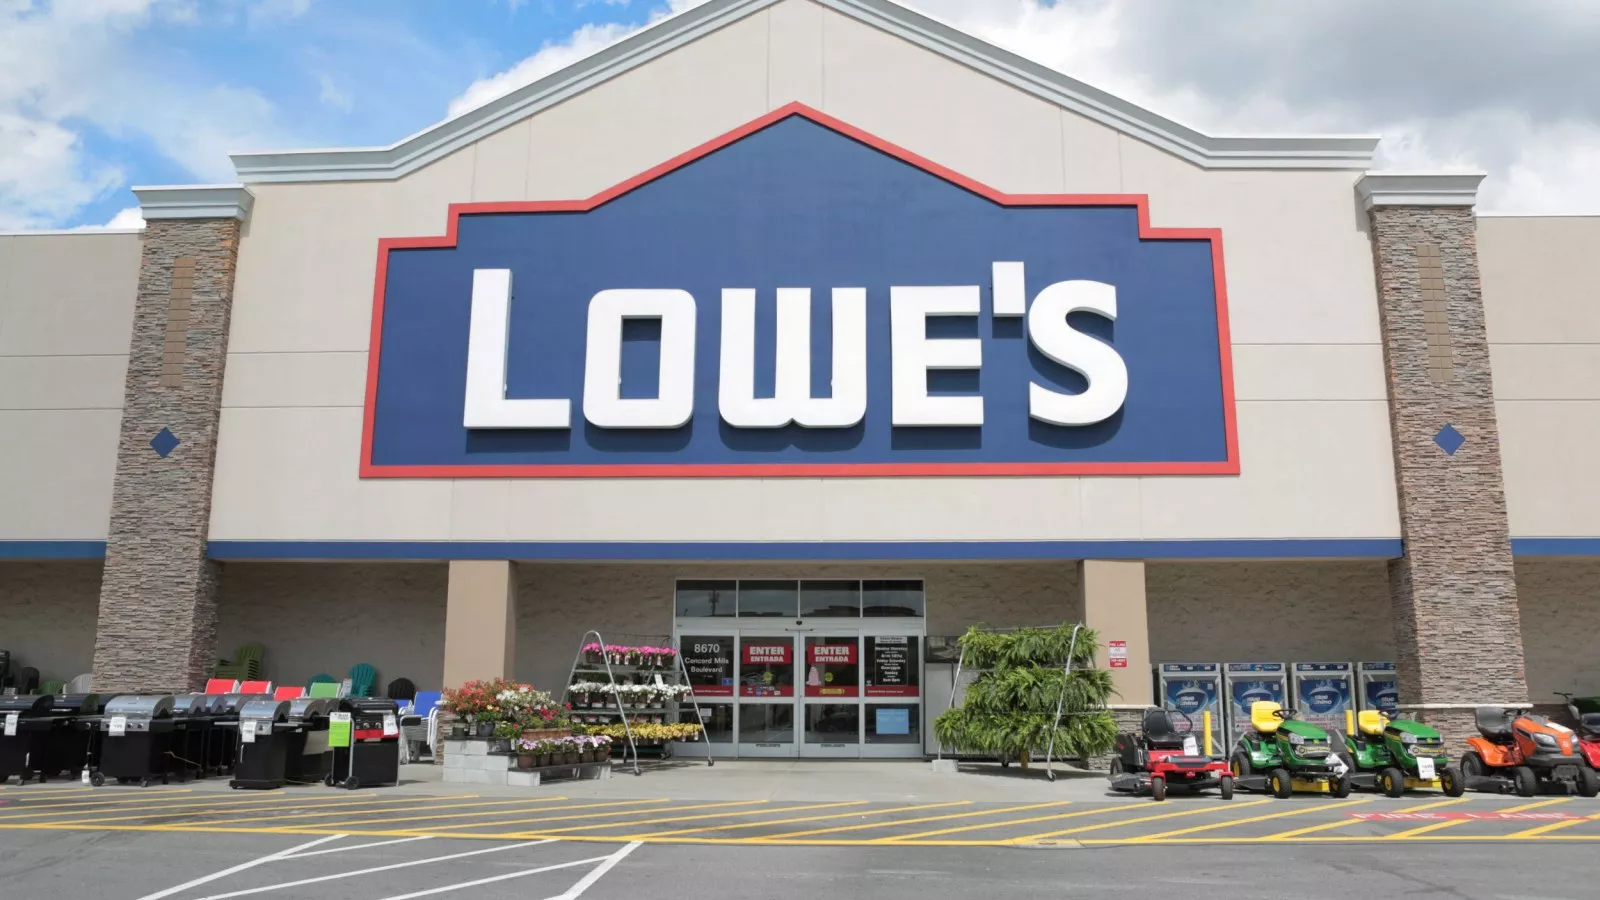 Lowes Refrigerator Black Friday: The Ultimate Guide to Finding the Best Deals